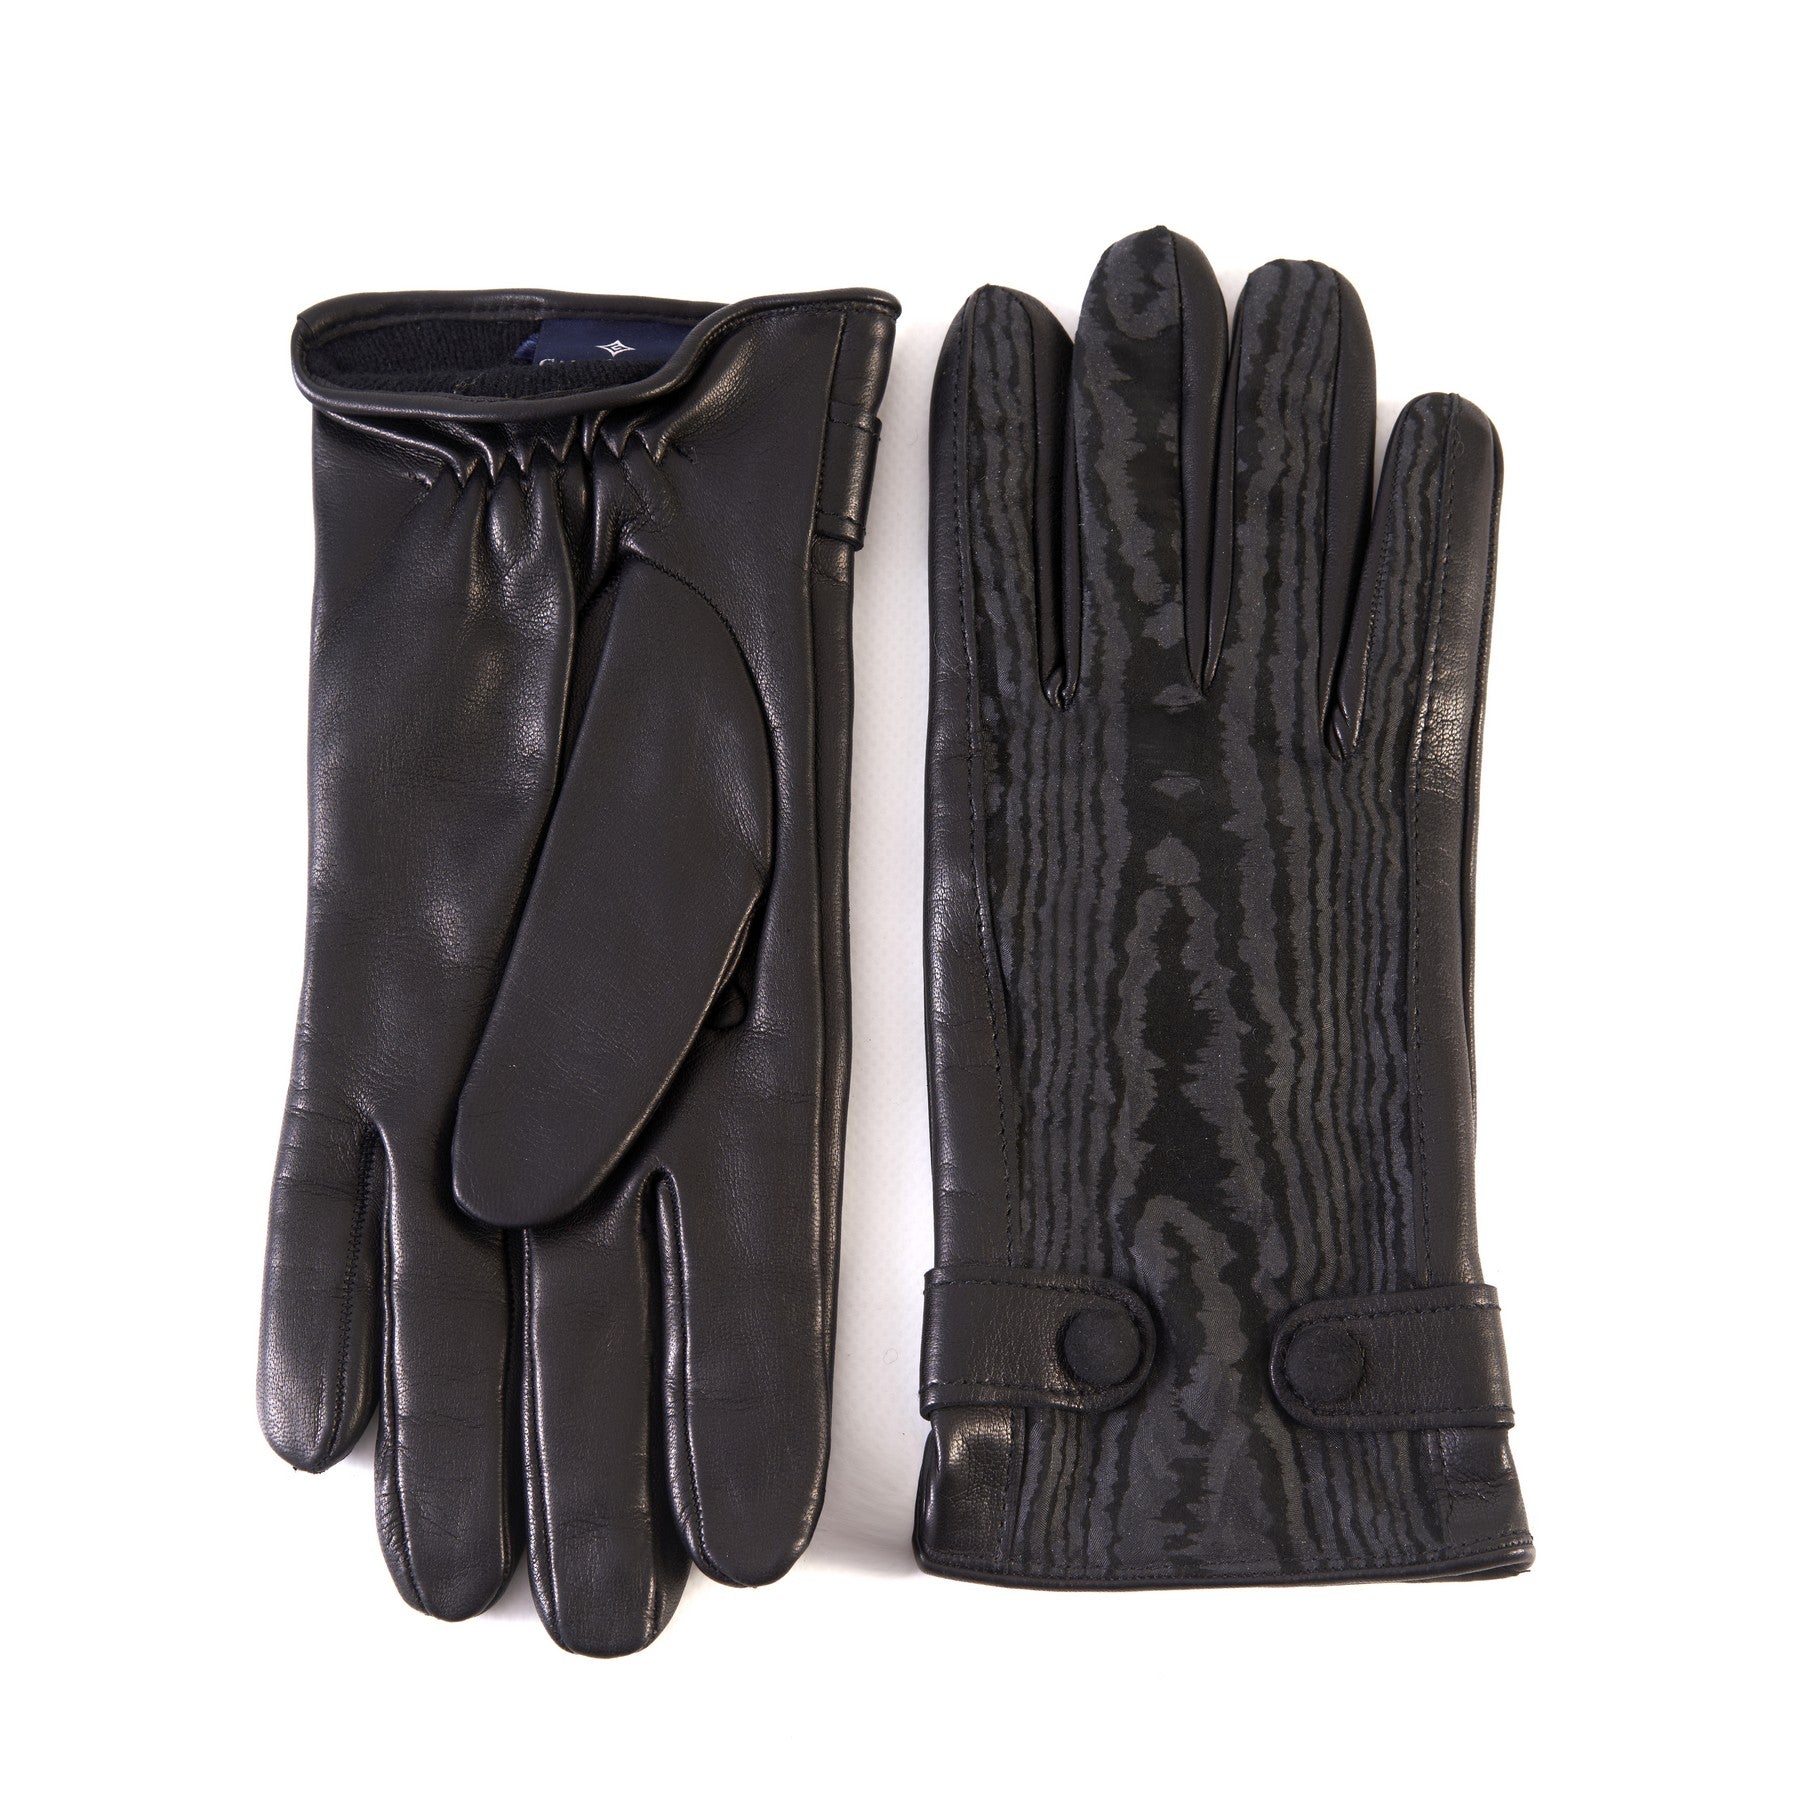 Men's black nappa and printed suede leather gloves with buttons and elastic on palm